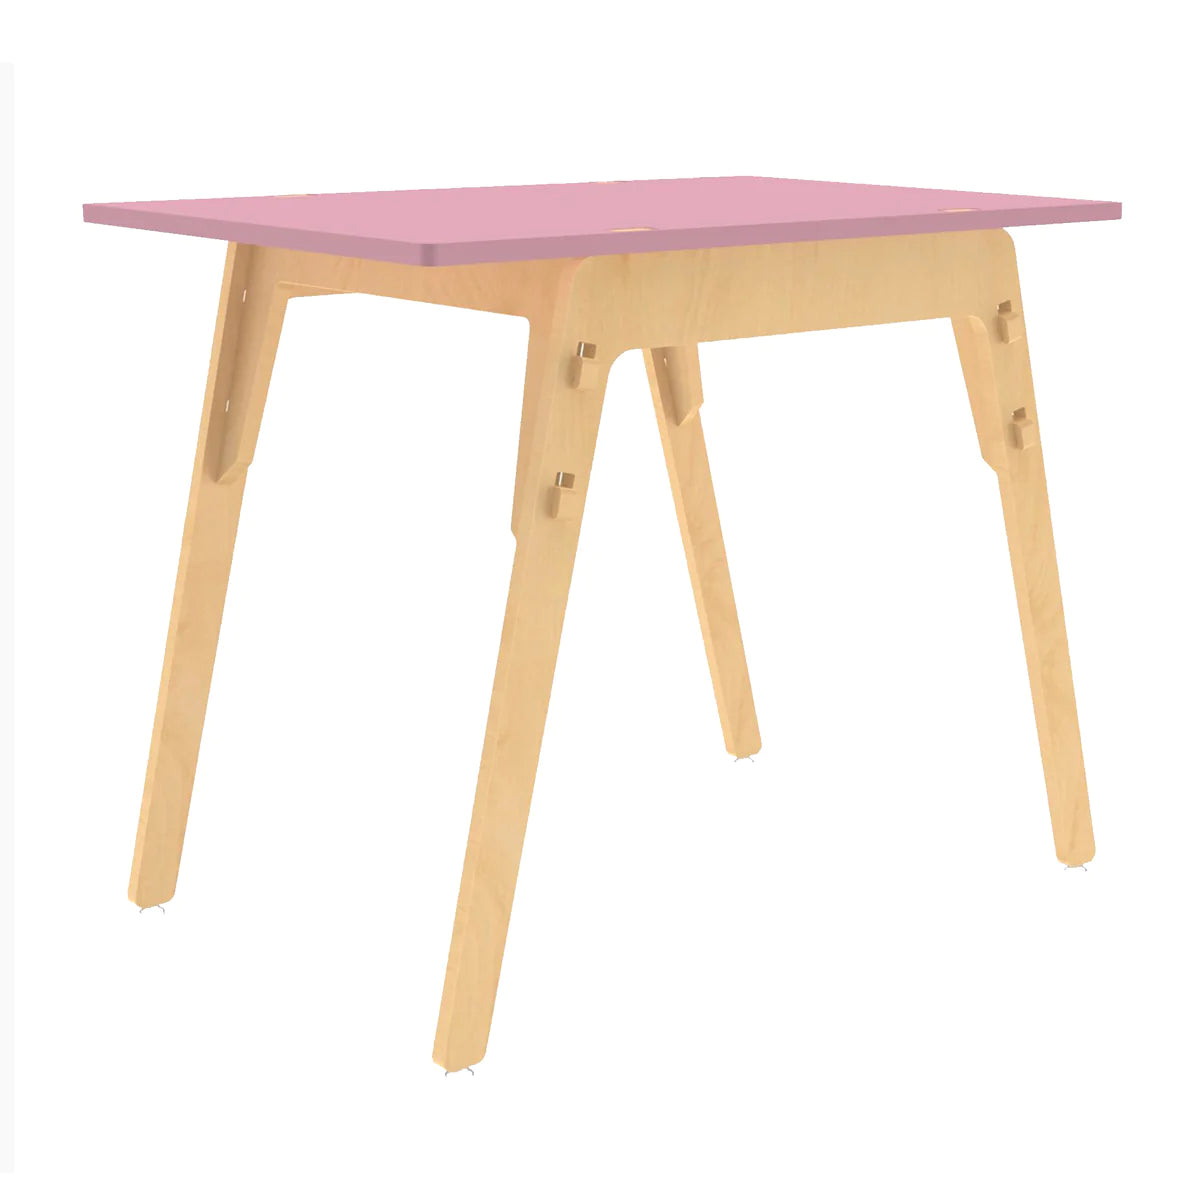 Buy Black Kiwi Wooden Table - Pink - Side View - SkilloToys.com